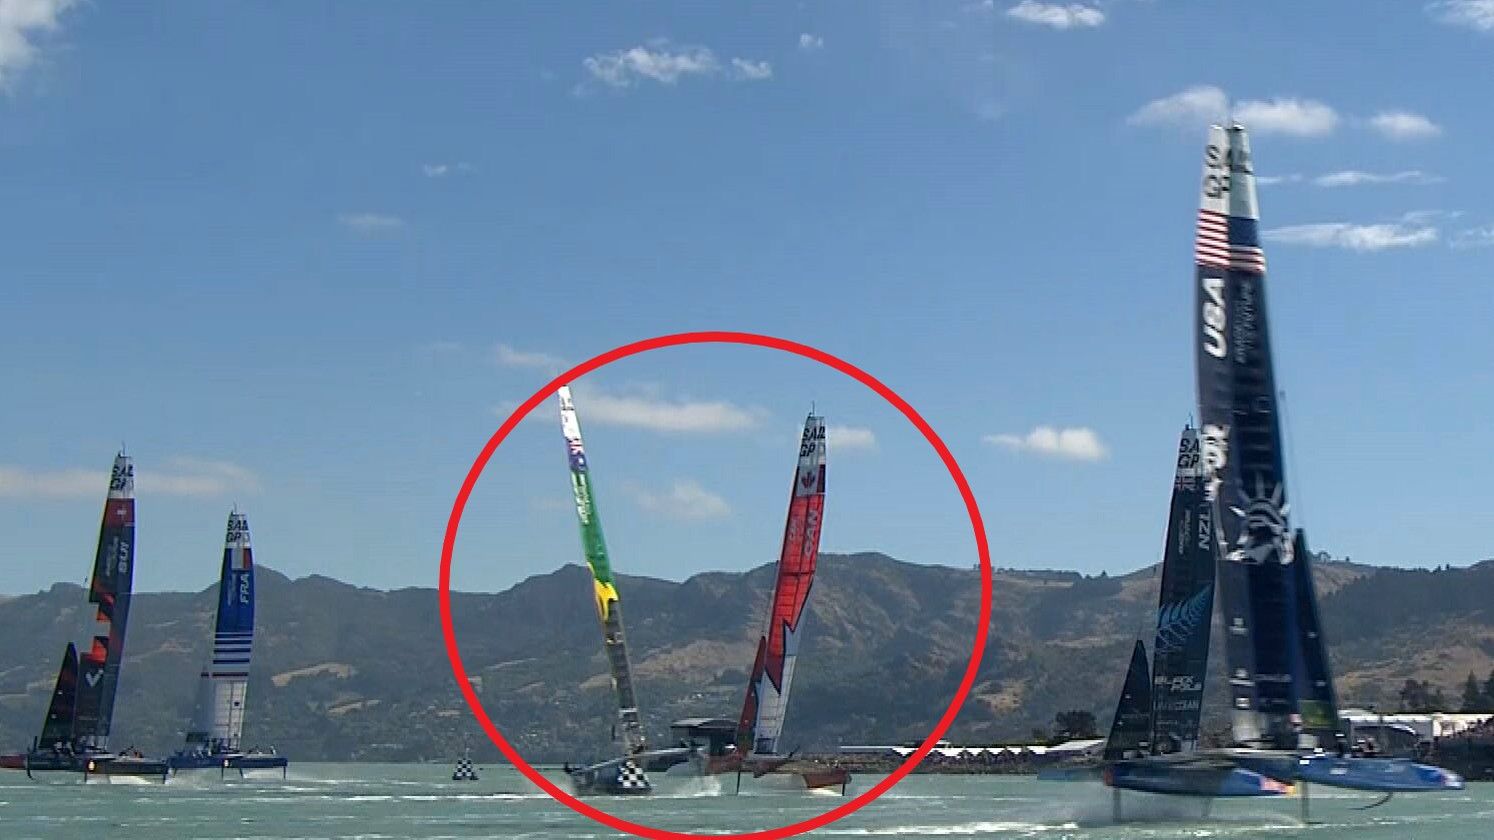 'You could kill someone': Aussie team 'in shock' after crashing out of SailGP